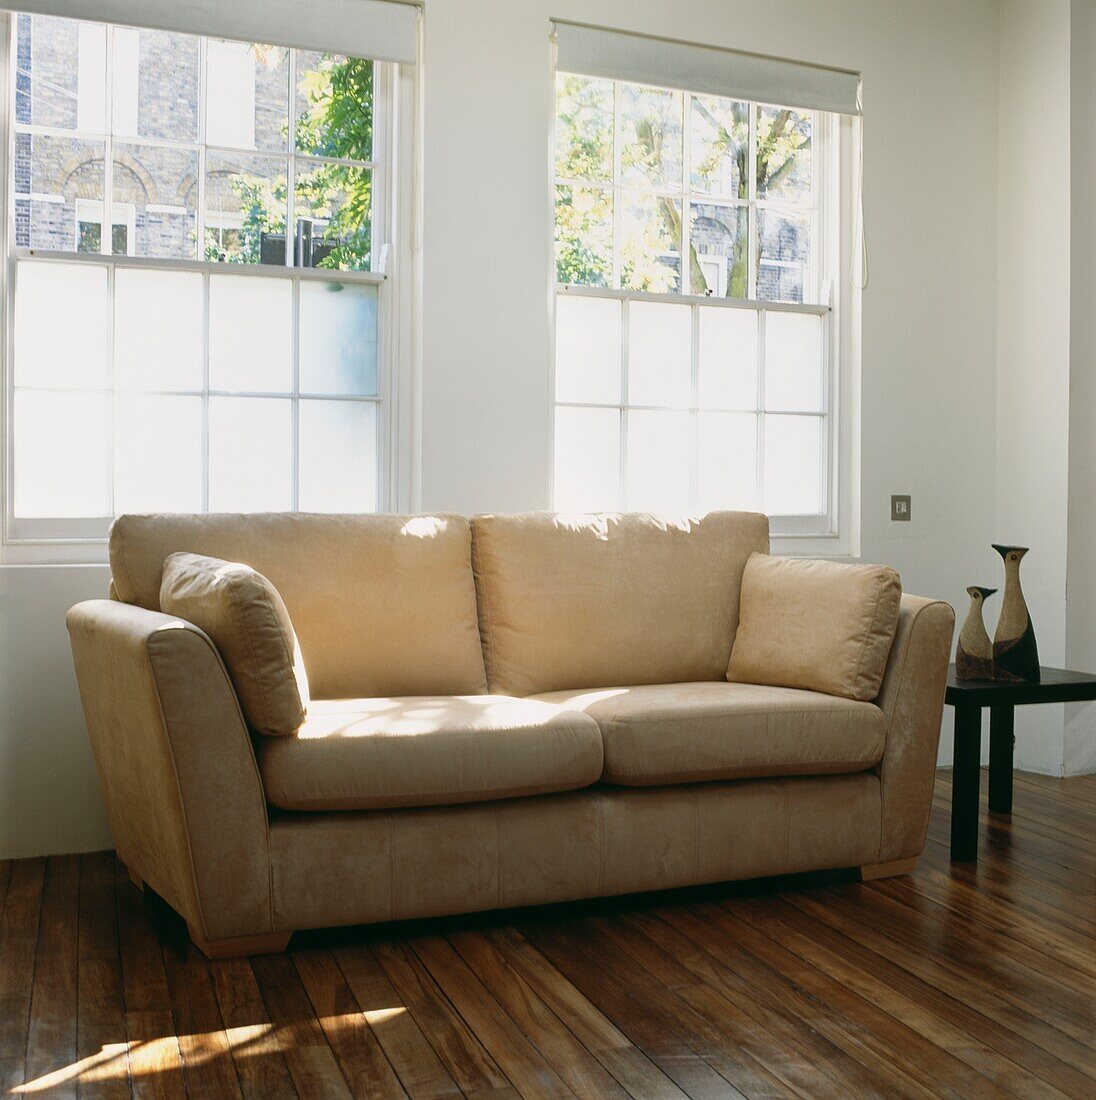 Cream leather sofa in front of frosted sash windows